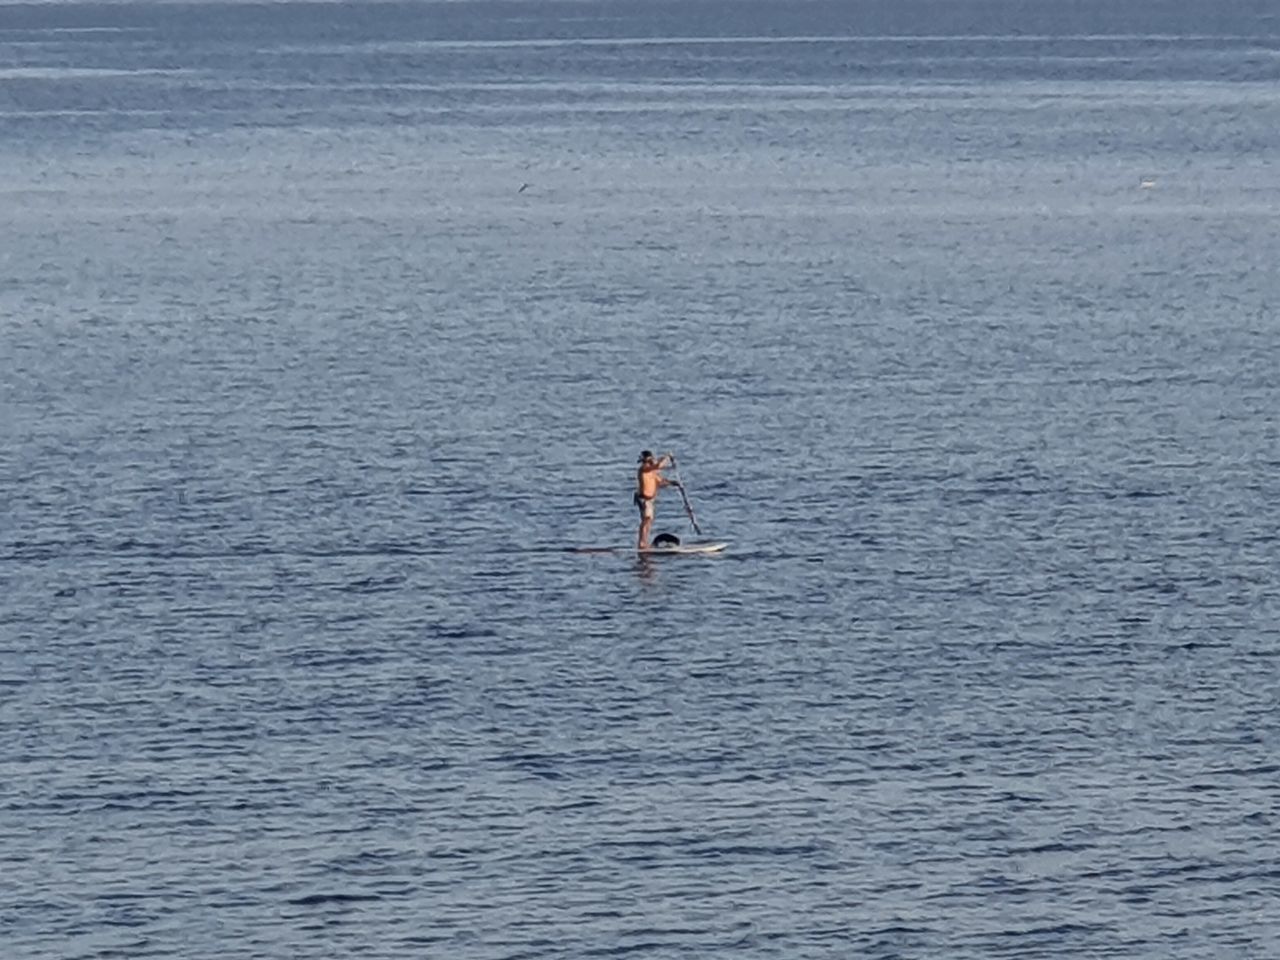 MAN SURFING IN SEA AGAINST RIPPLED WATER